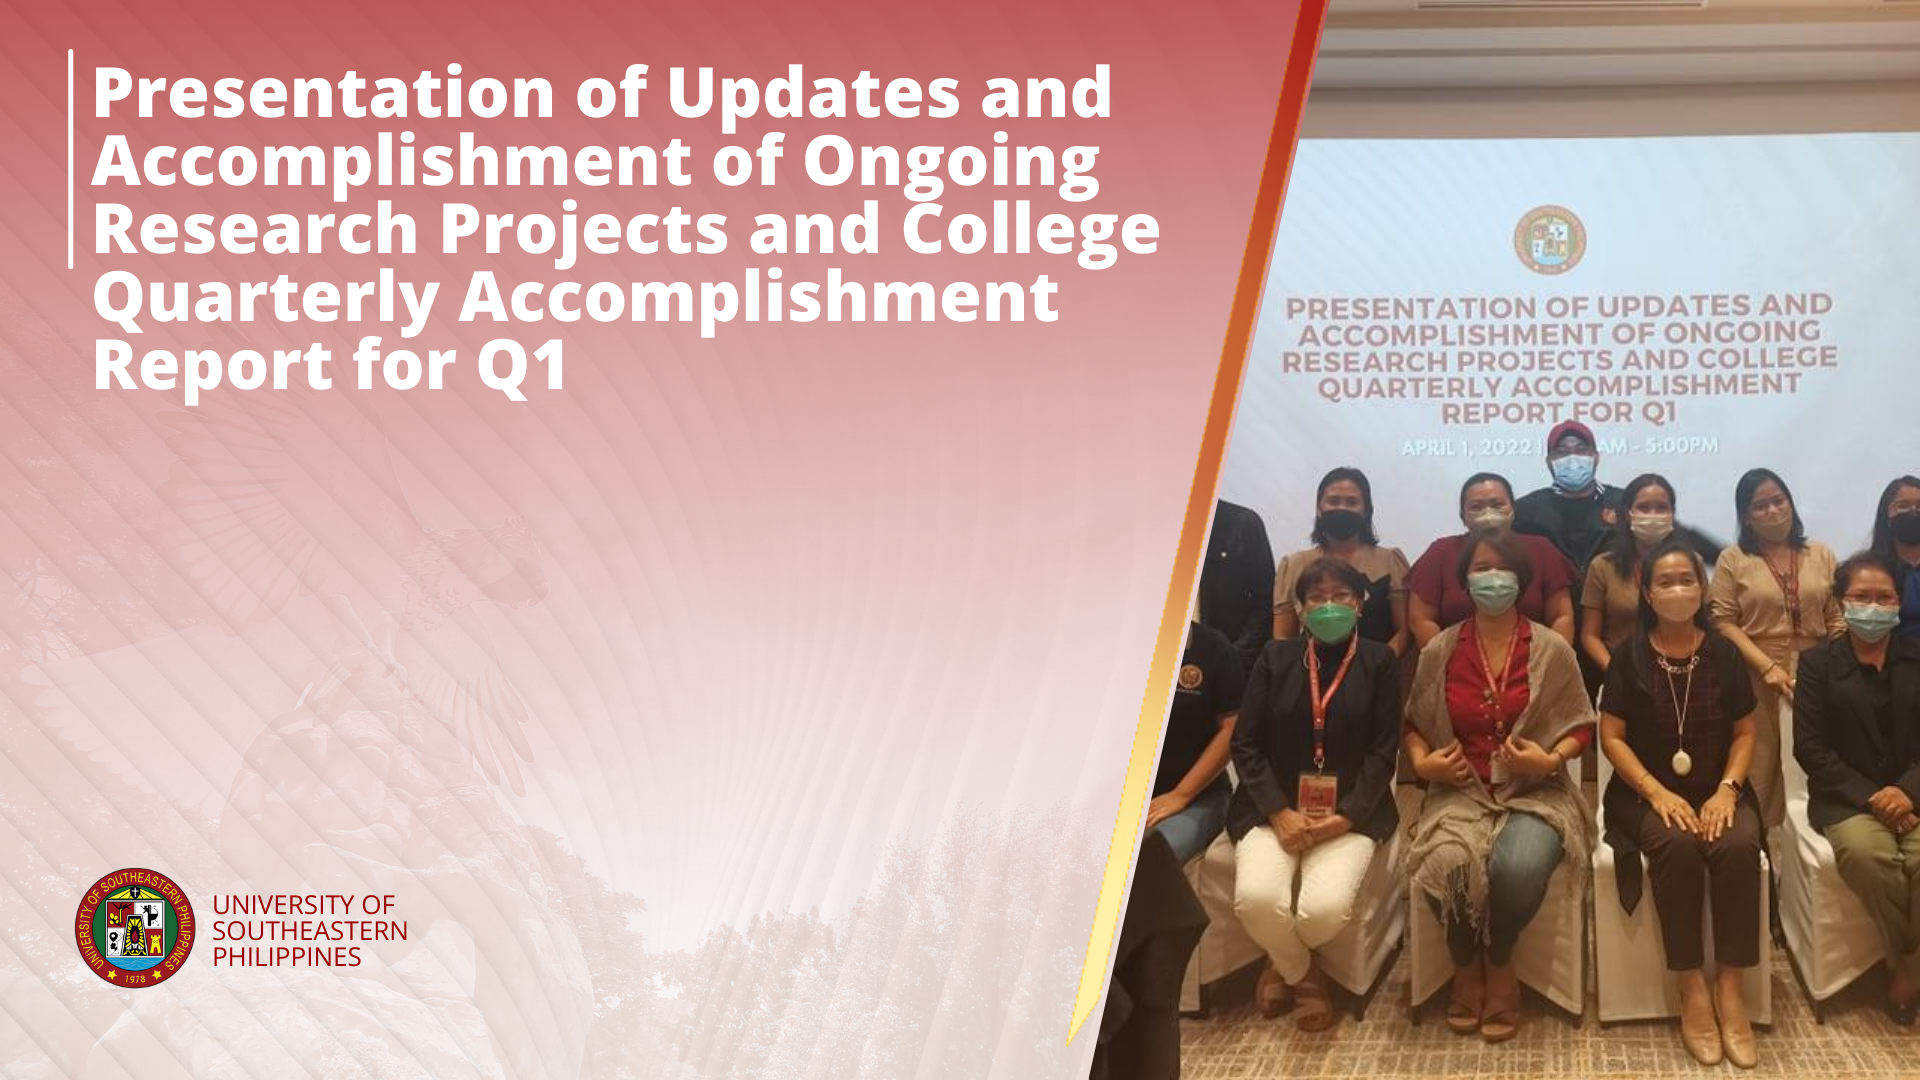 Presentation of Ongoing Research Updates and Accomplishment Report for Q1 vis-á-vis Presentation of College Quarterly Performance Review Report for the 1st Quarter of 2022